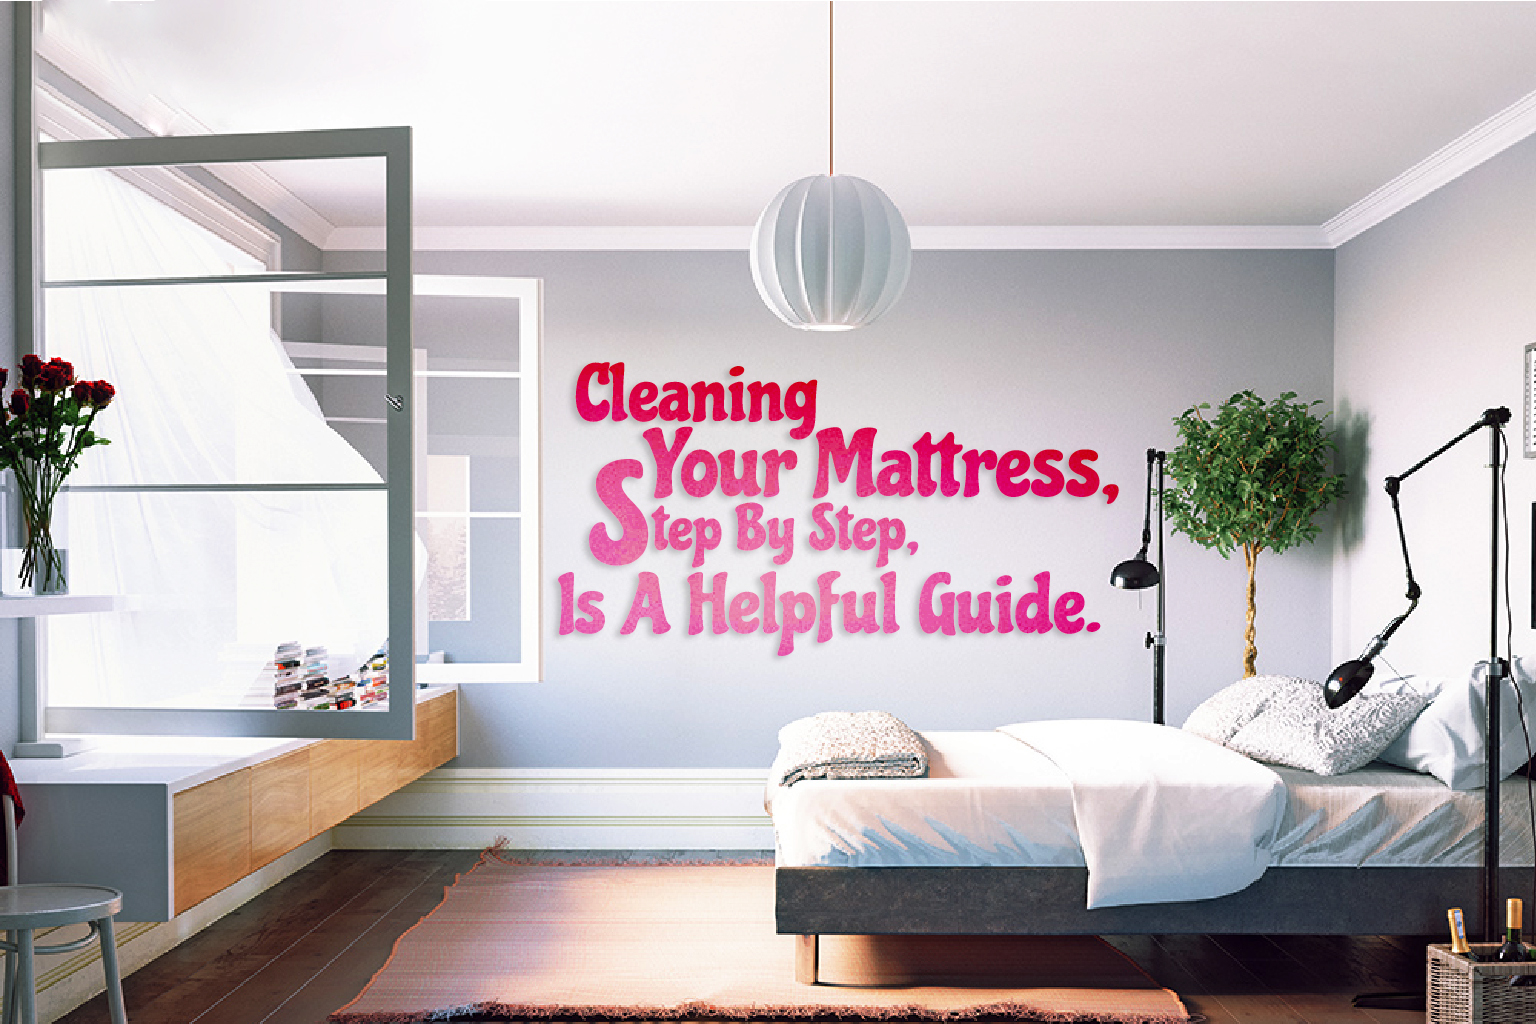 Cleaning Your Mattress, Step By Step, Is A Helpful Guide.